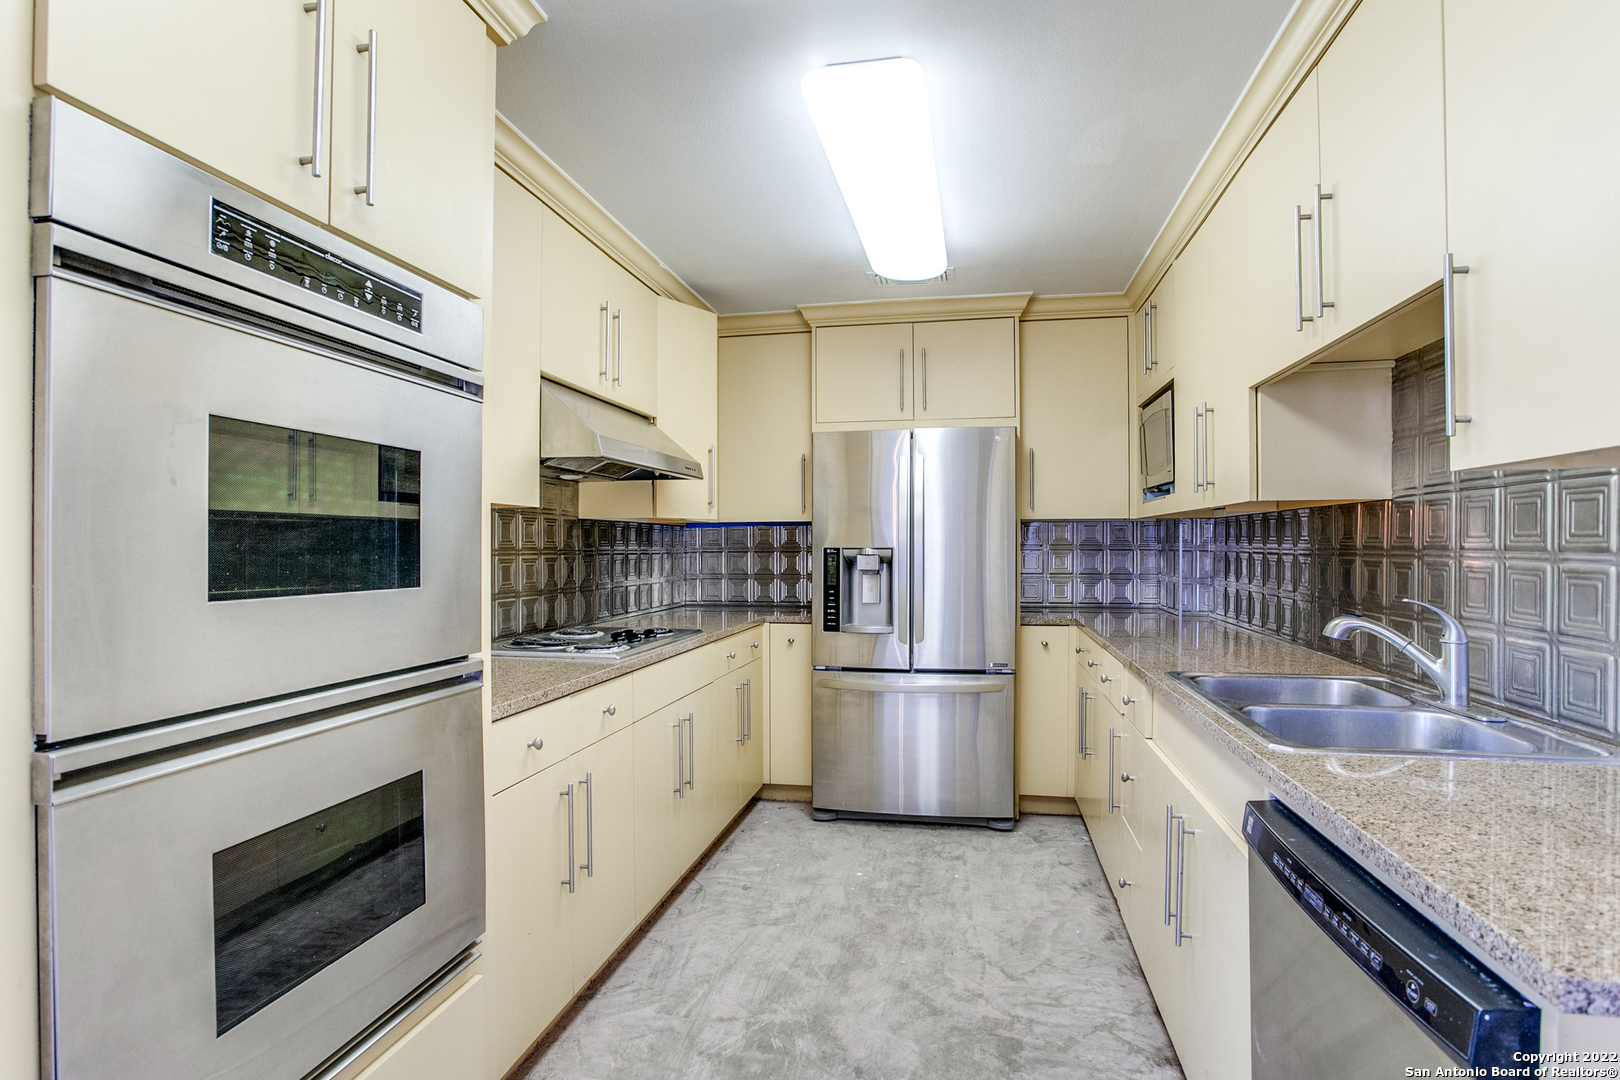 a kitchen with refrigerator cabinets and microwave